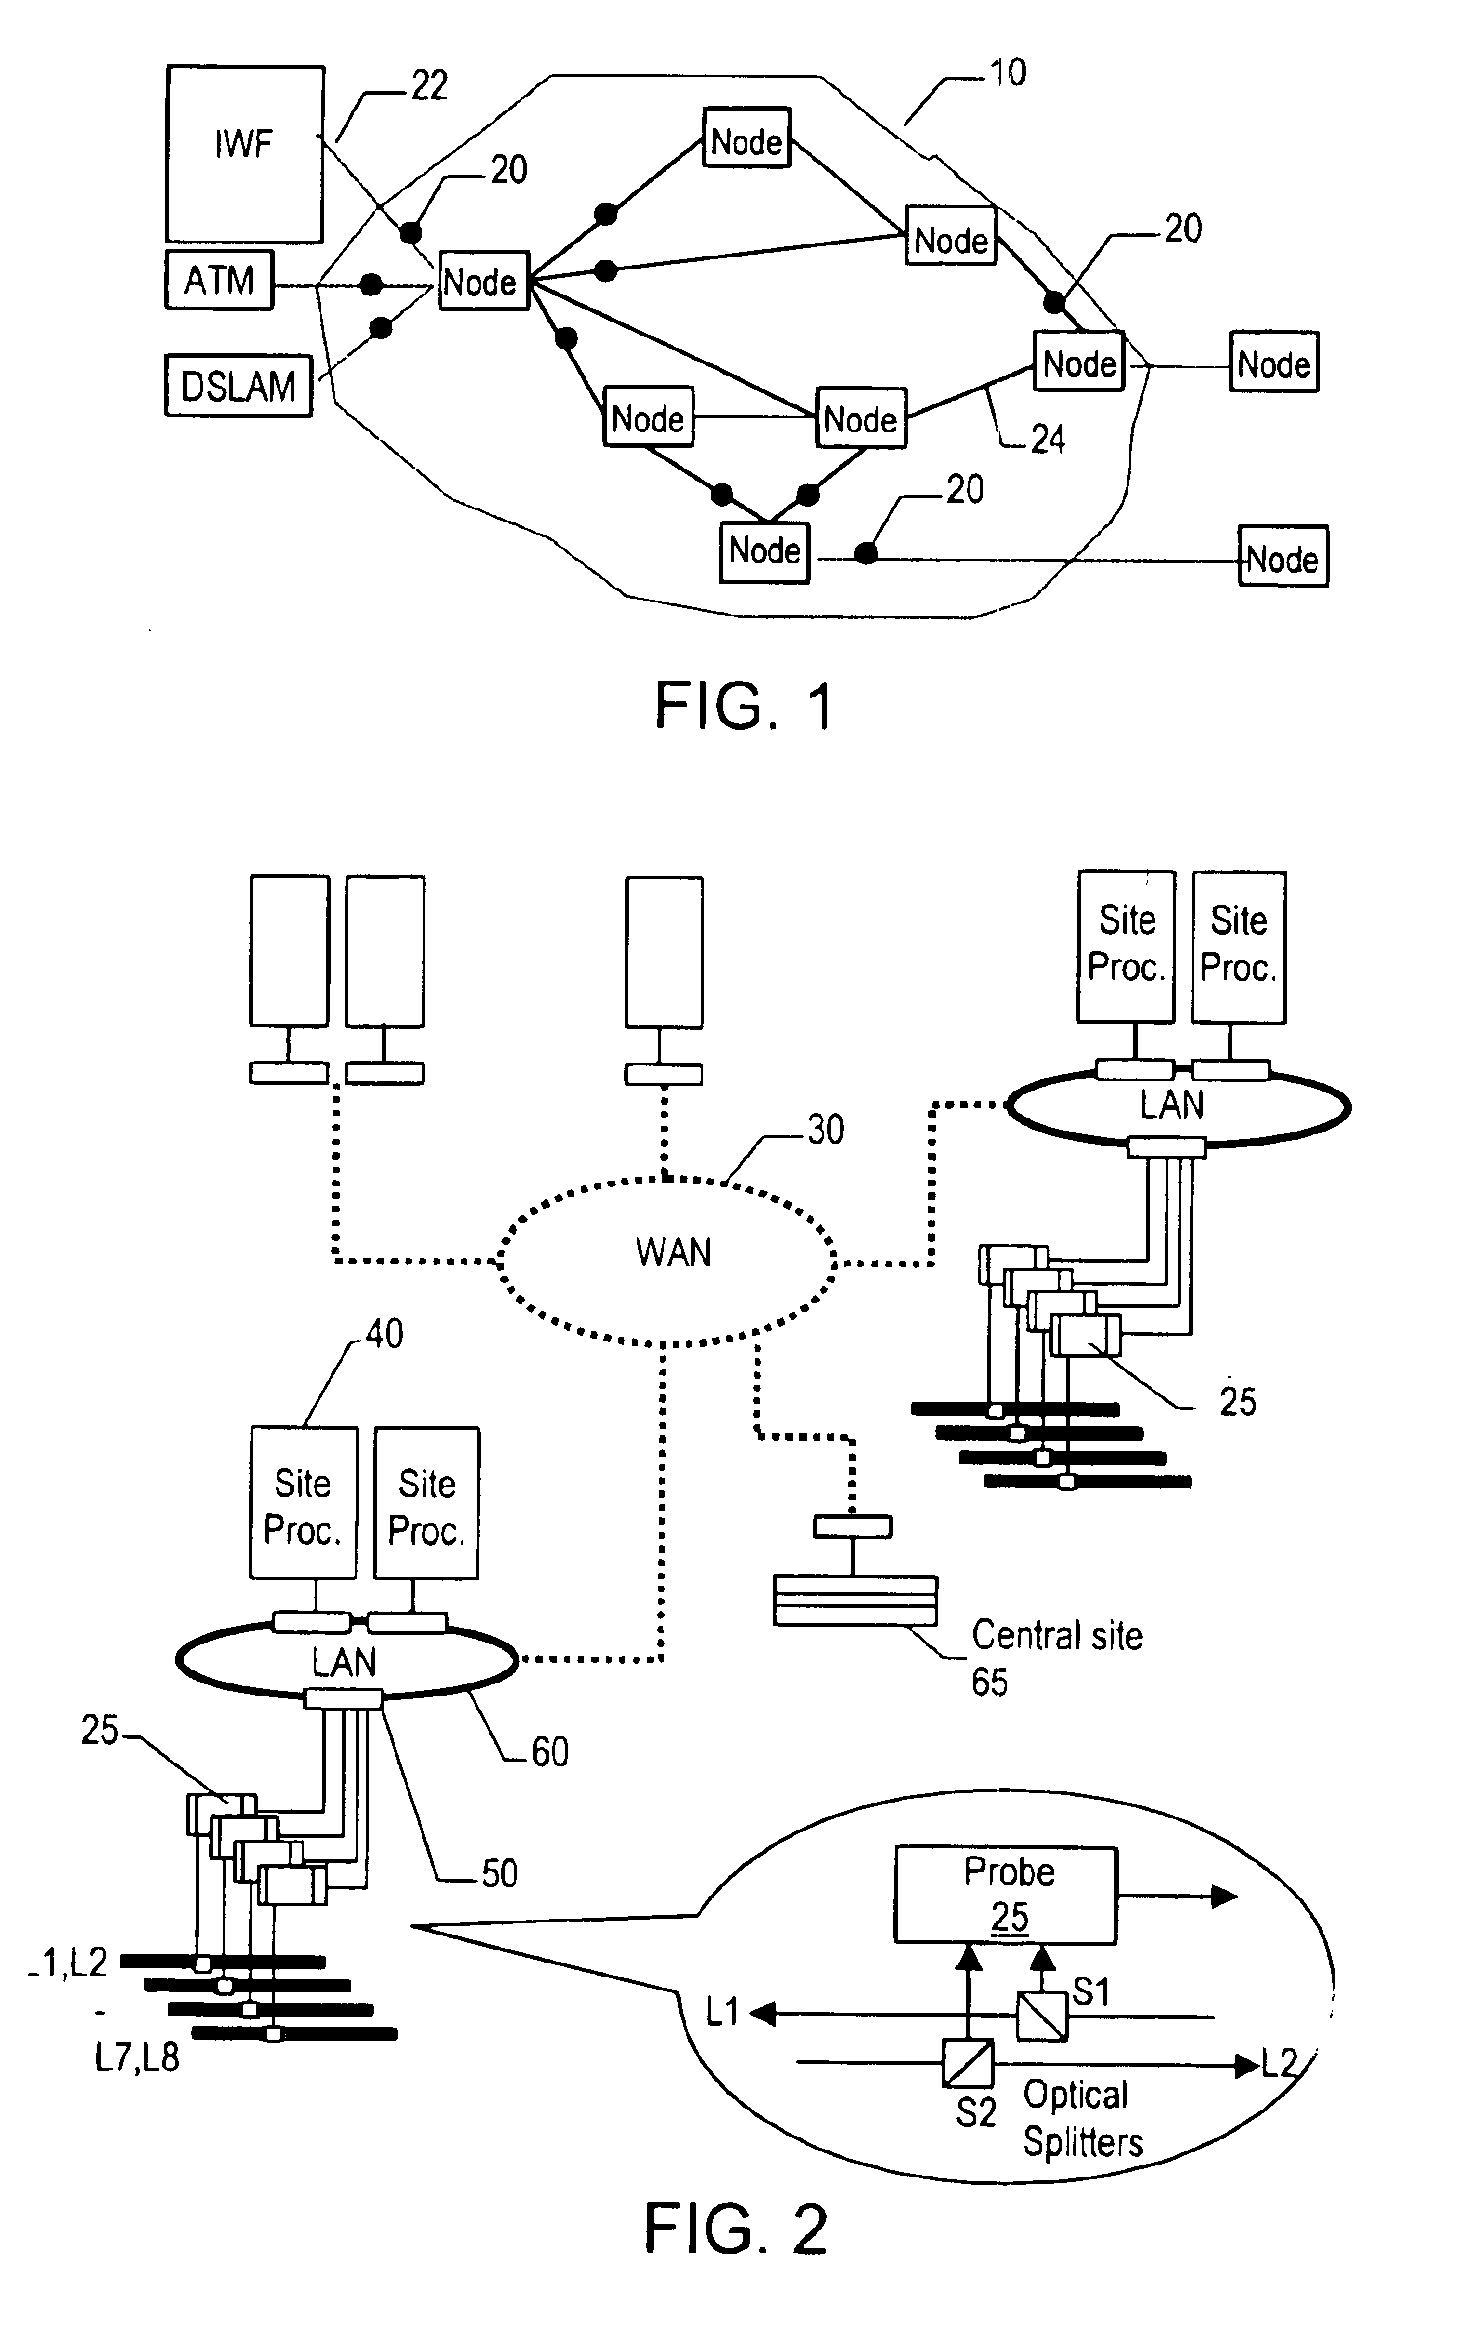 Multi-channel network monitoring apparatus, signal replicating device, and systems including such apparatus and devices, and enclosure for multi-processor equipment